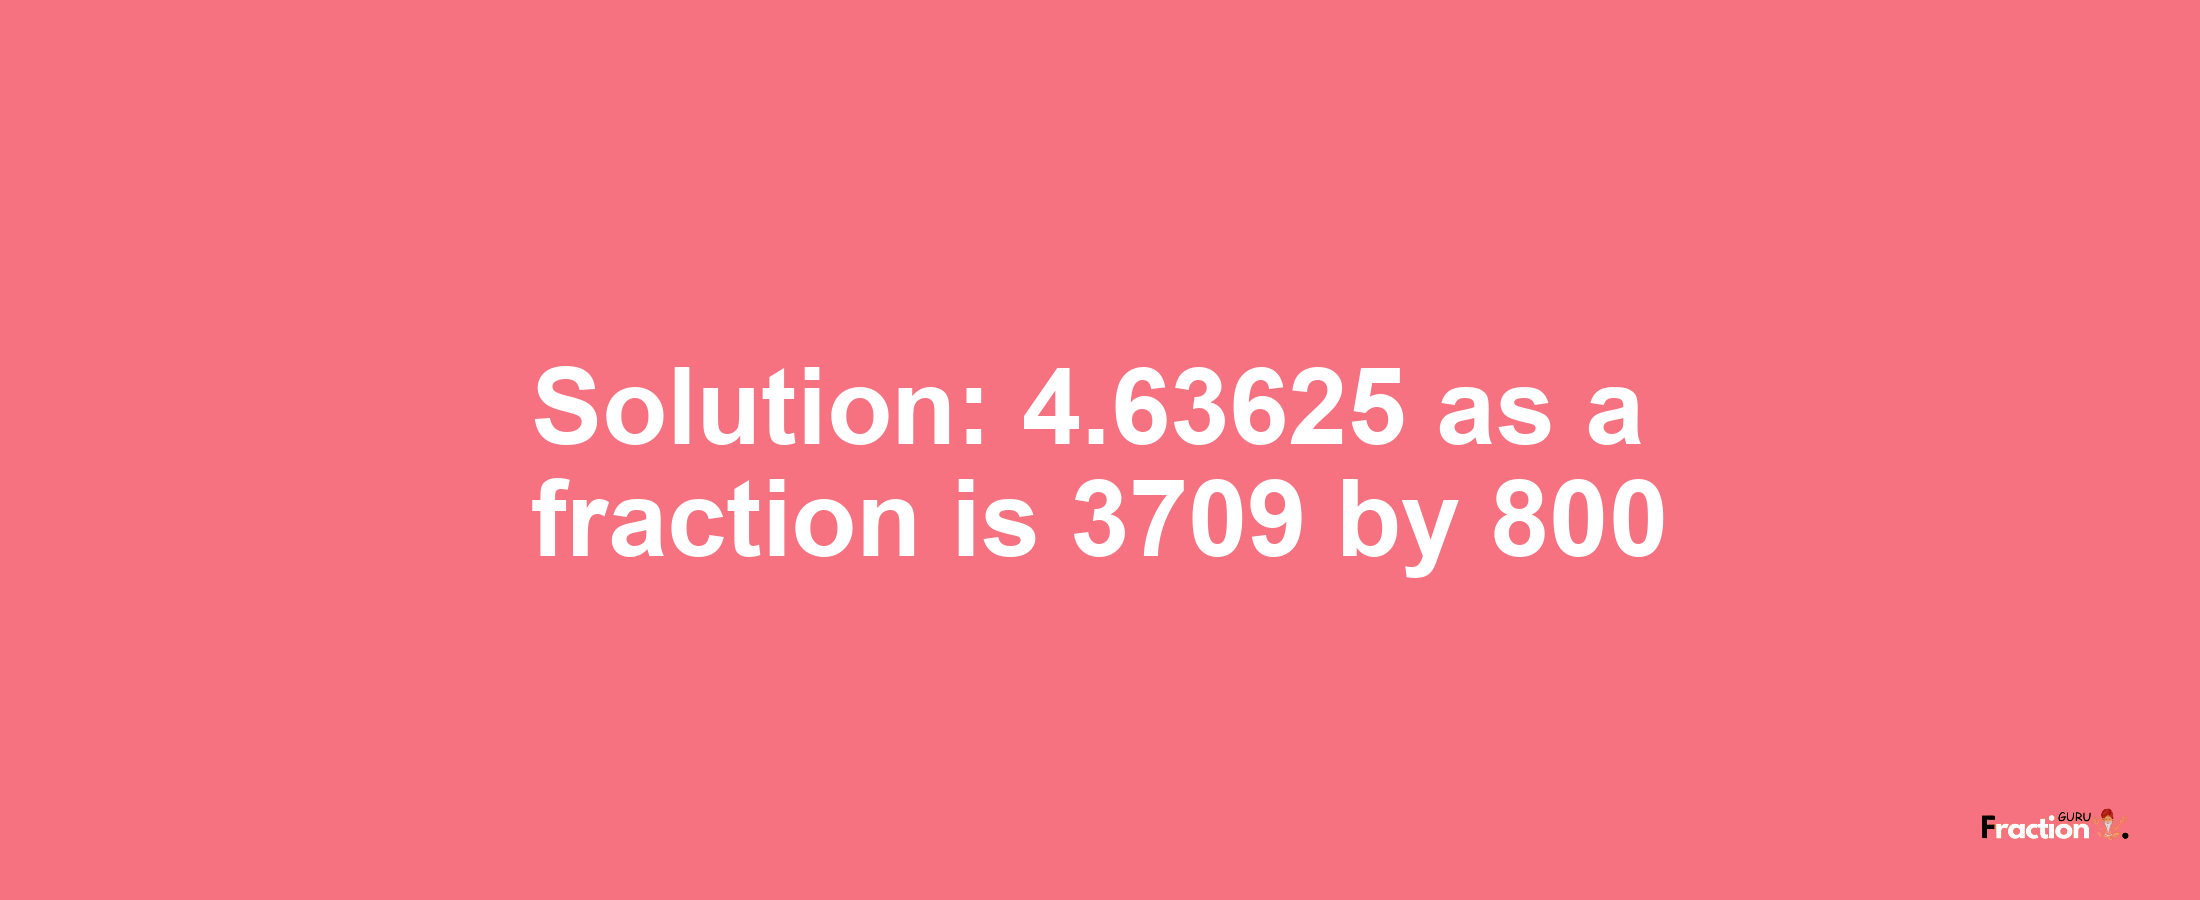 Solution:4.63625 as a fraction is 3709/800